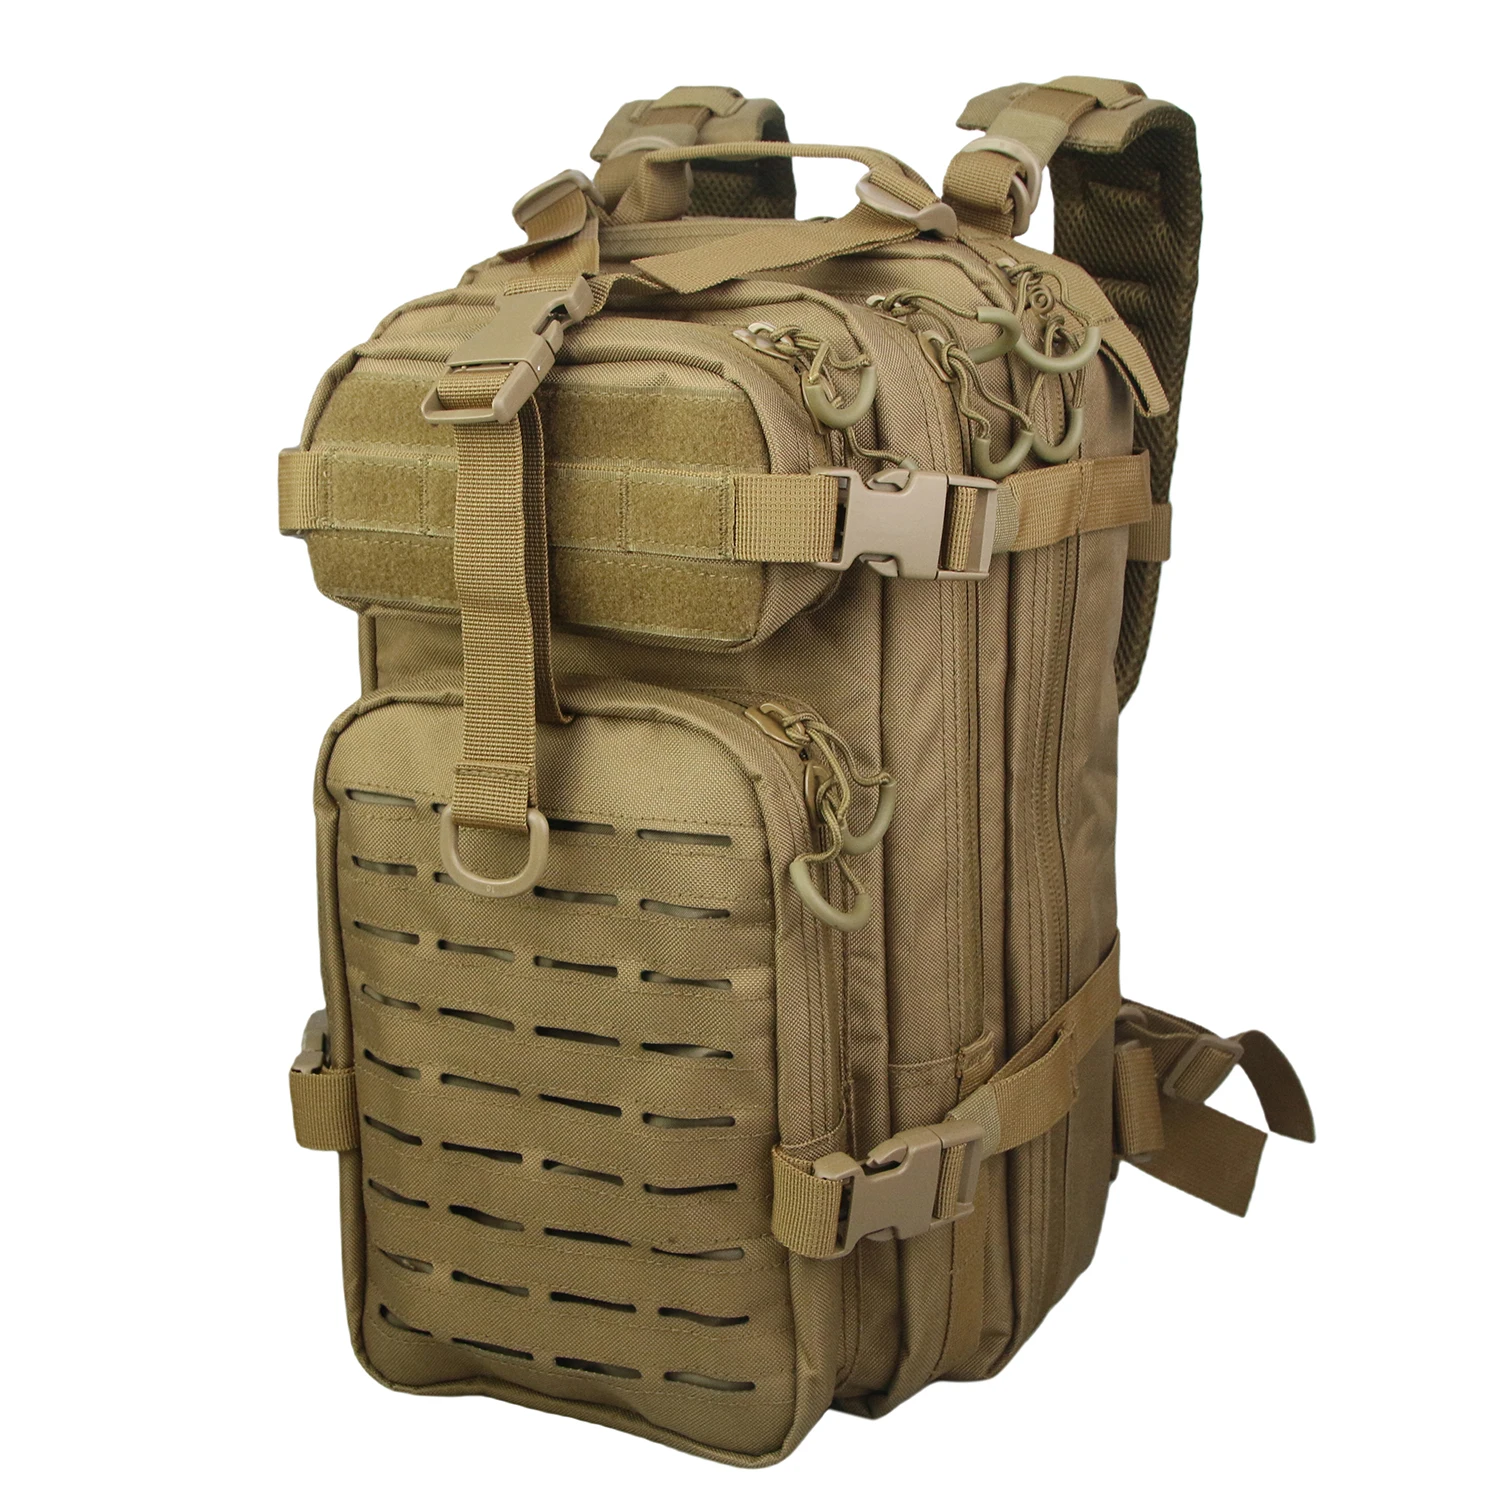 

US inventory MOLLE Assaltss custom Medical tactical bag military sport outdoor sport pack Military tactical backpack, Coyote sac a dos tactique militaire